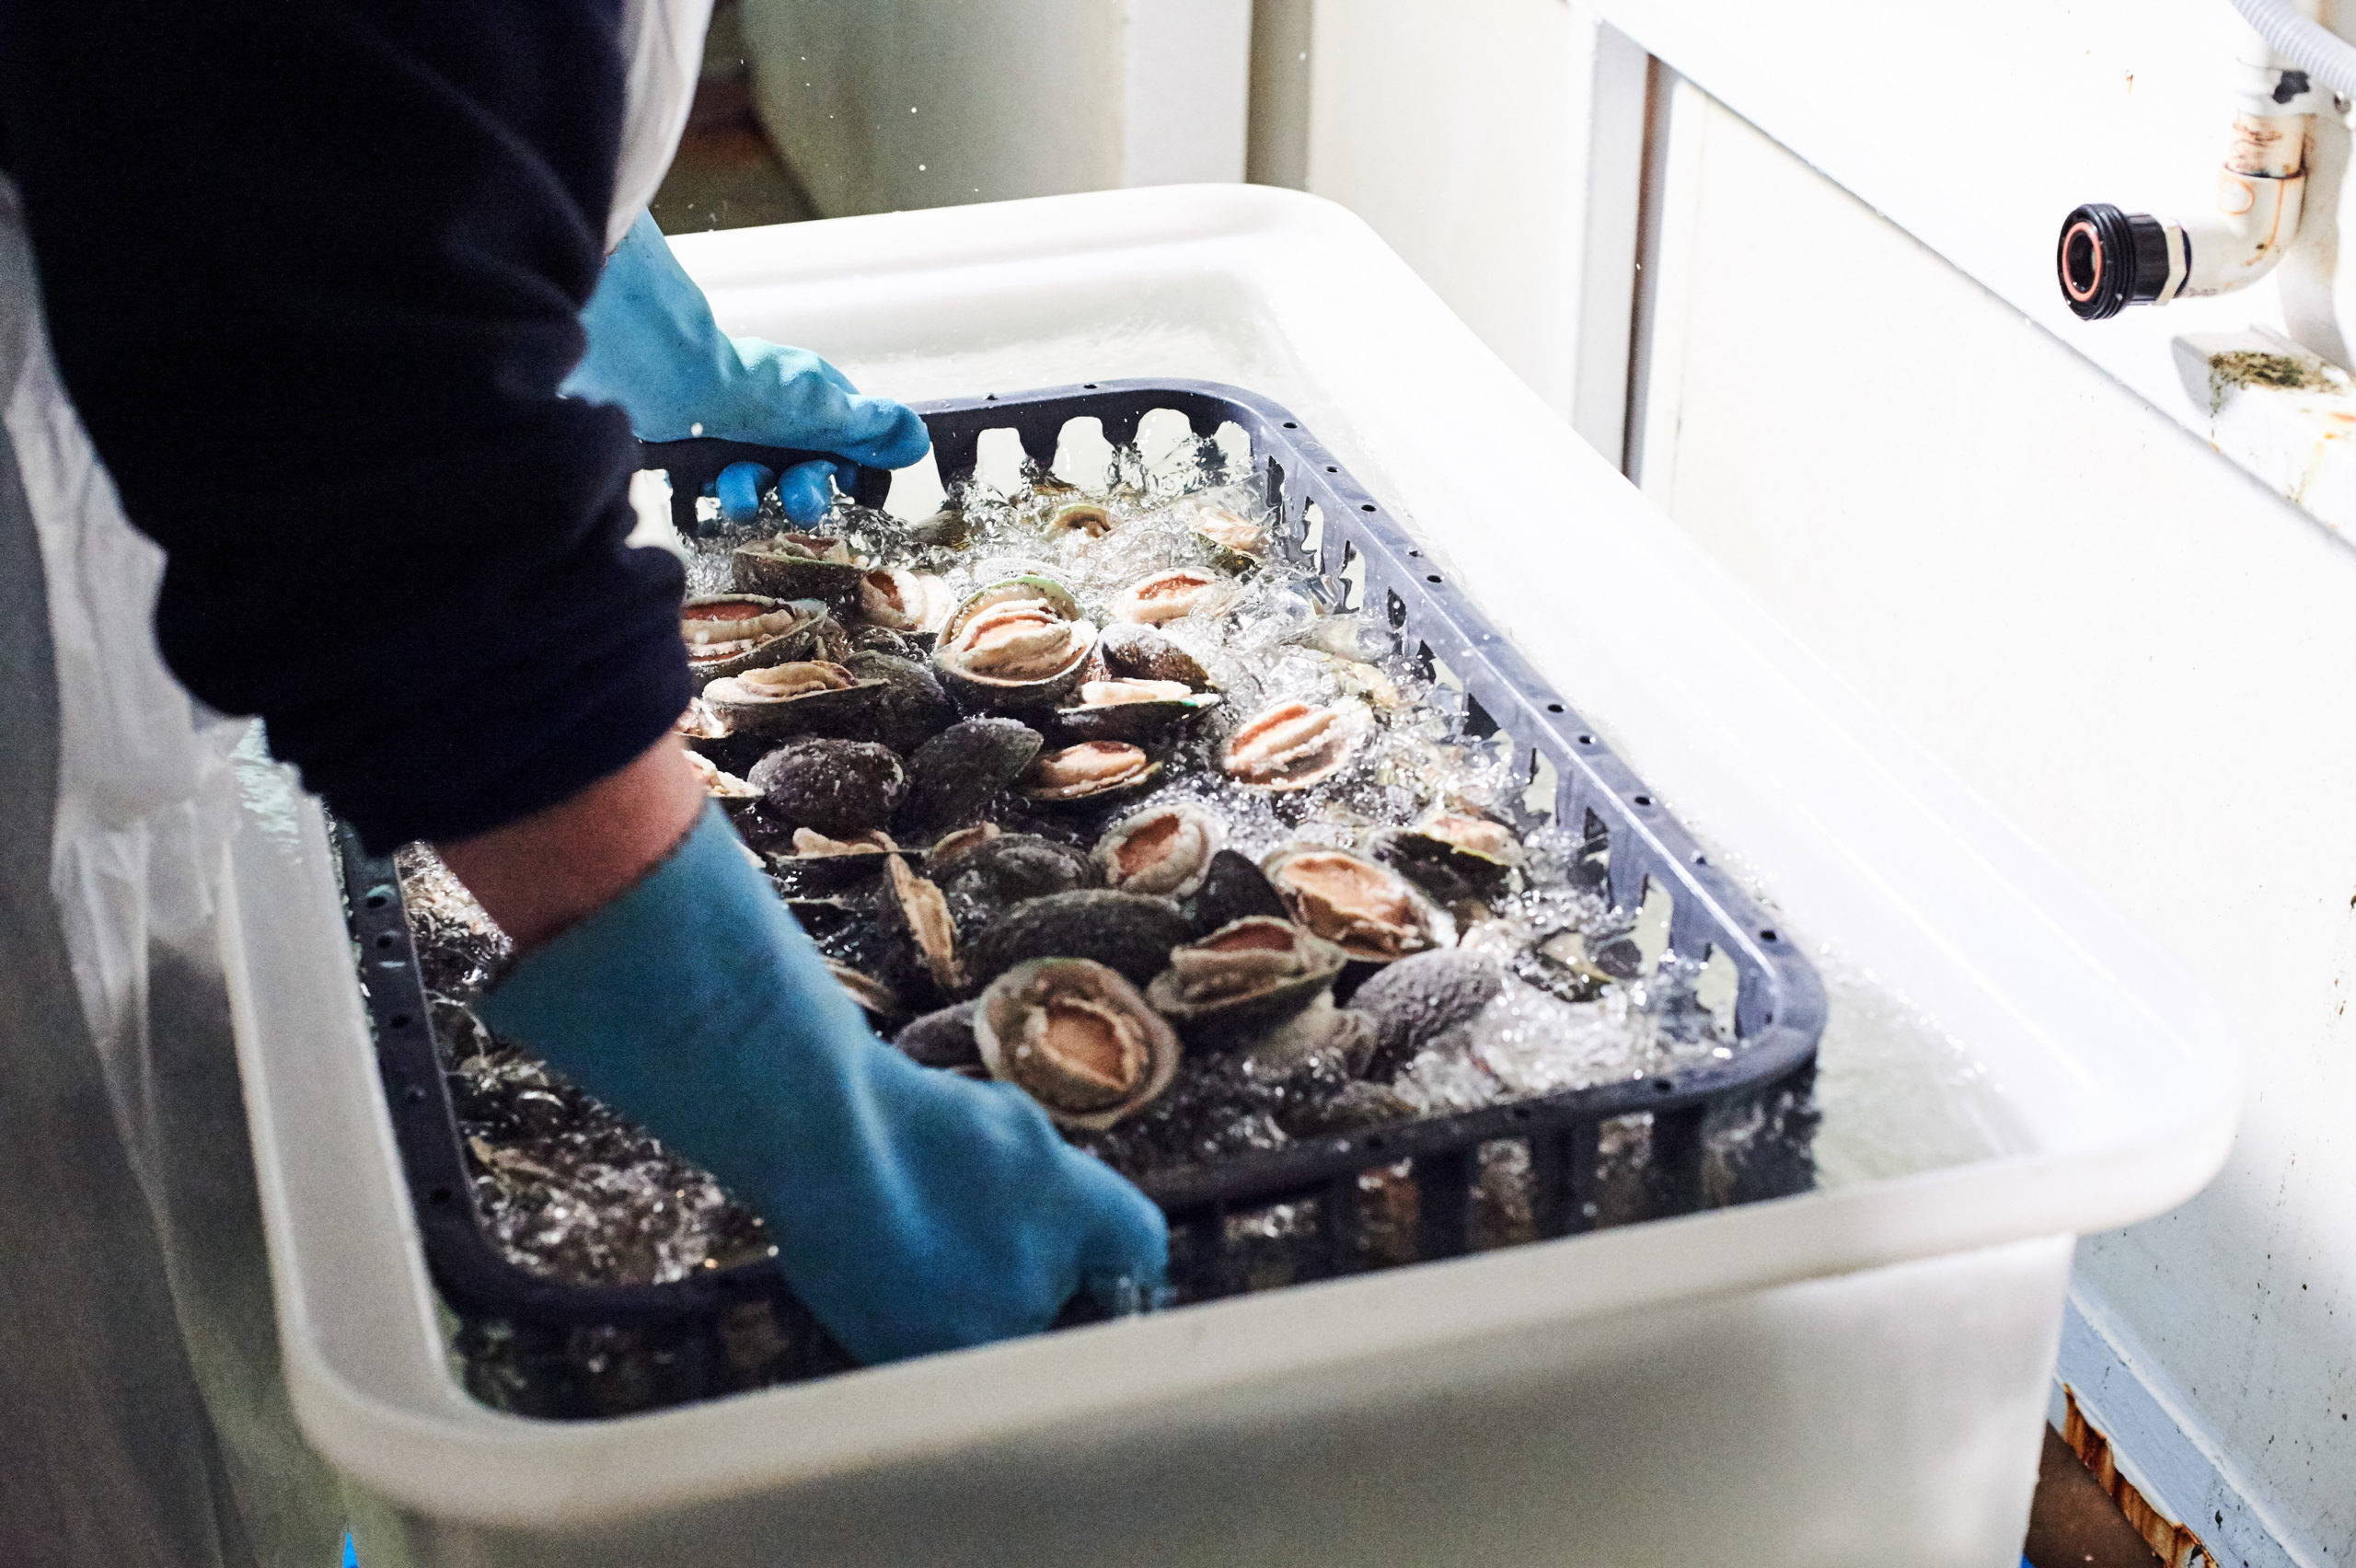 A tray of fresh abalone, held by two hands in blue rubber gloves, is submerged into a tub full of water to freeze them in suspended animation.